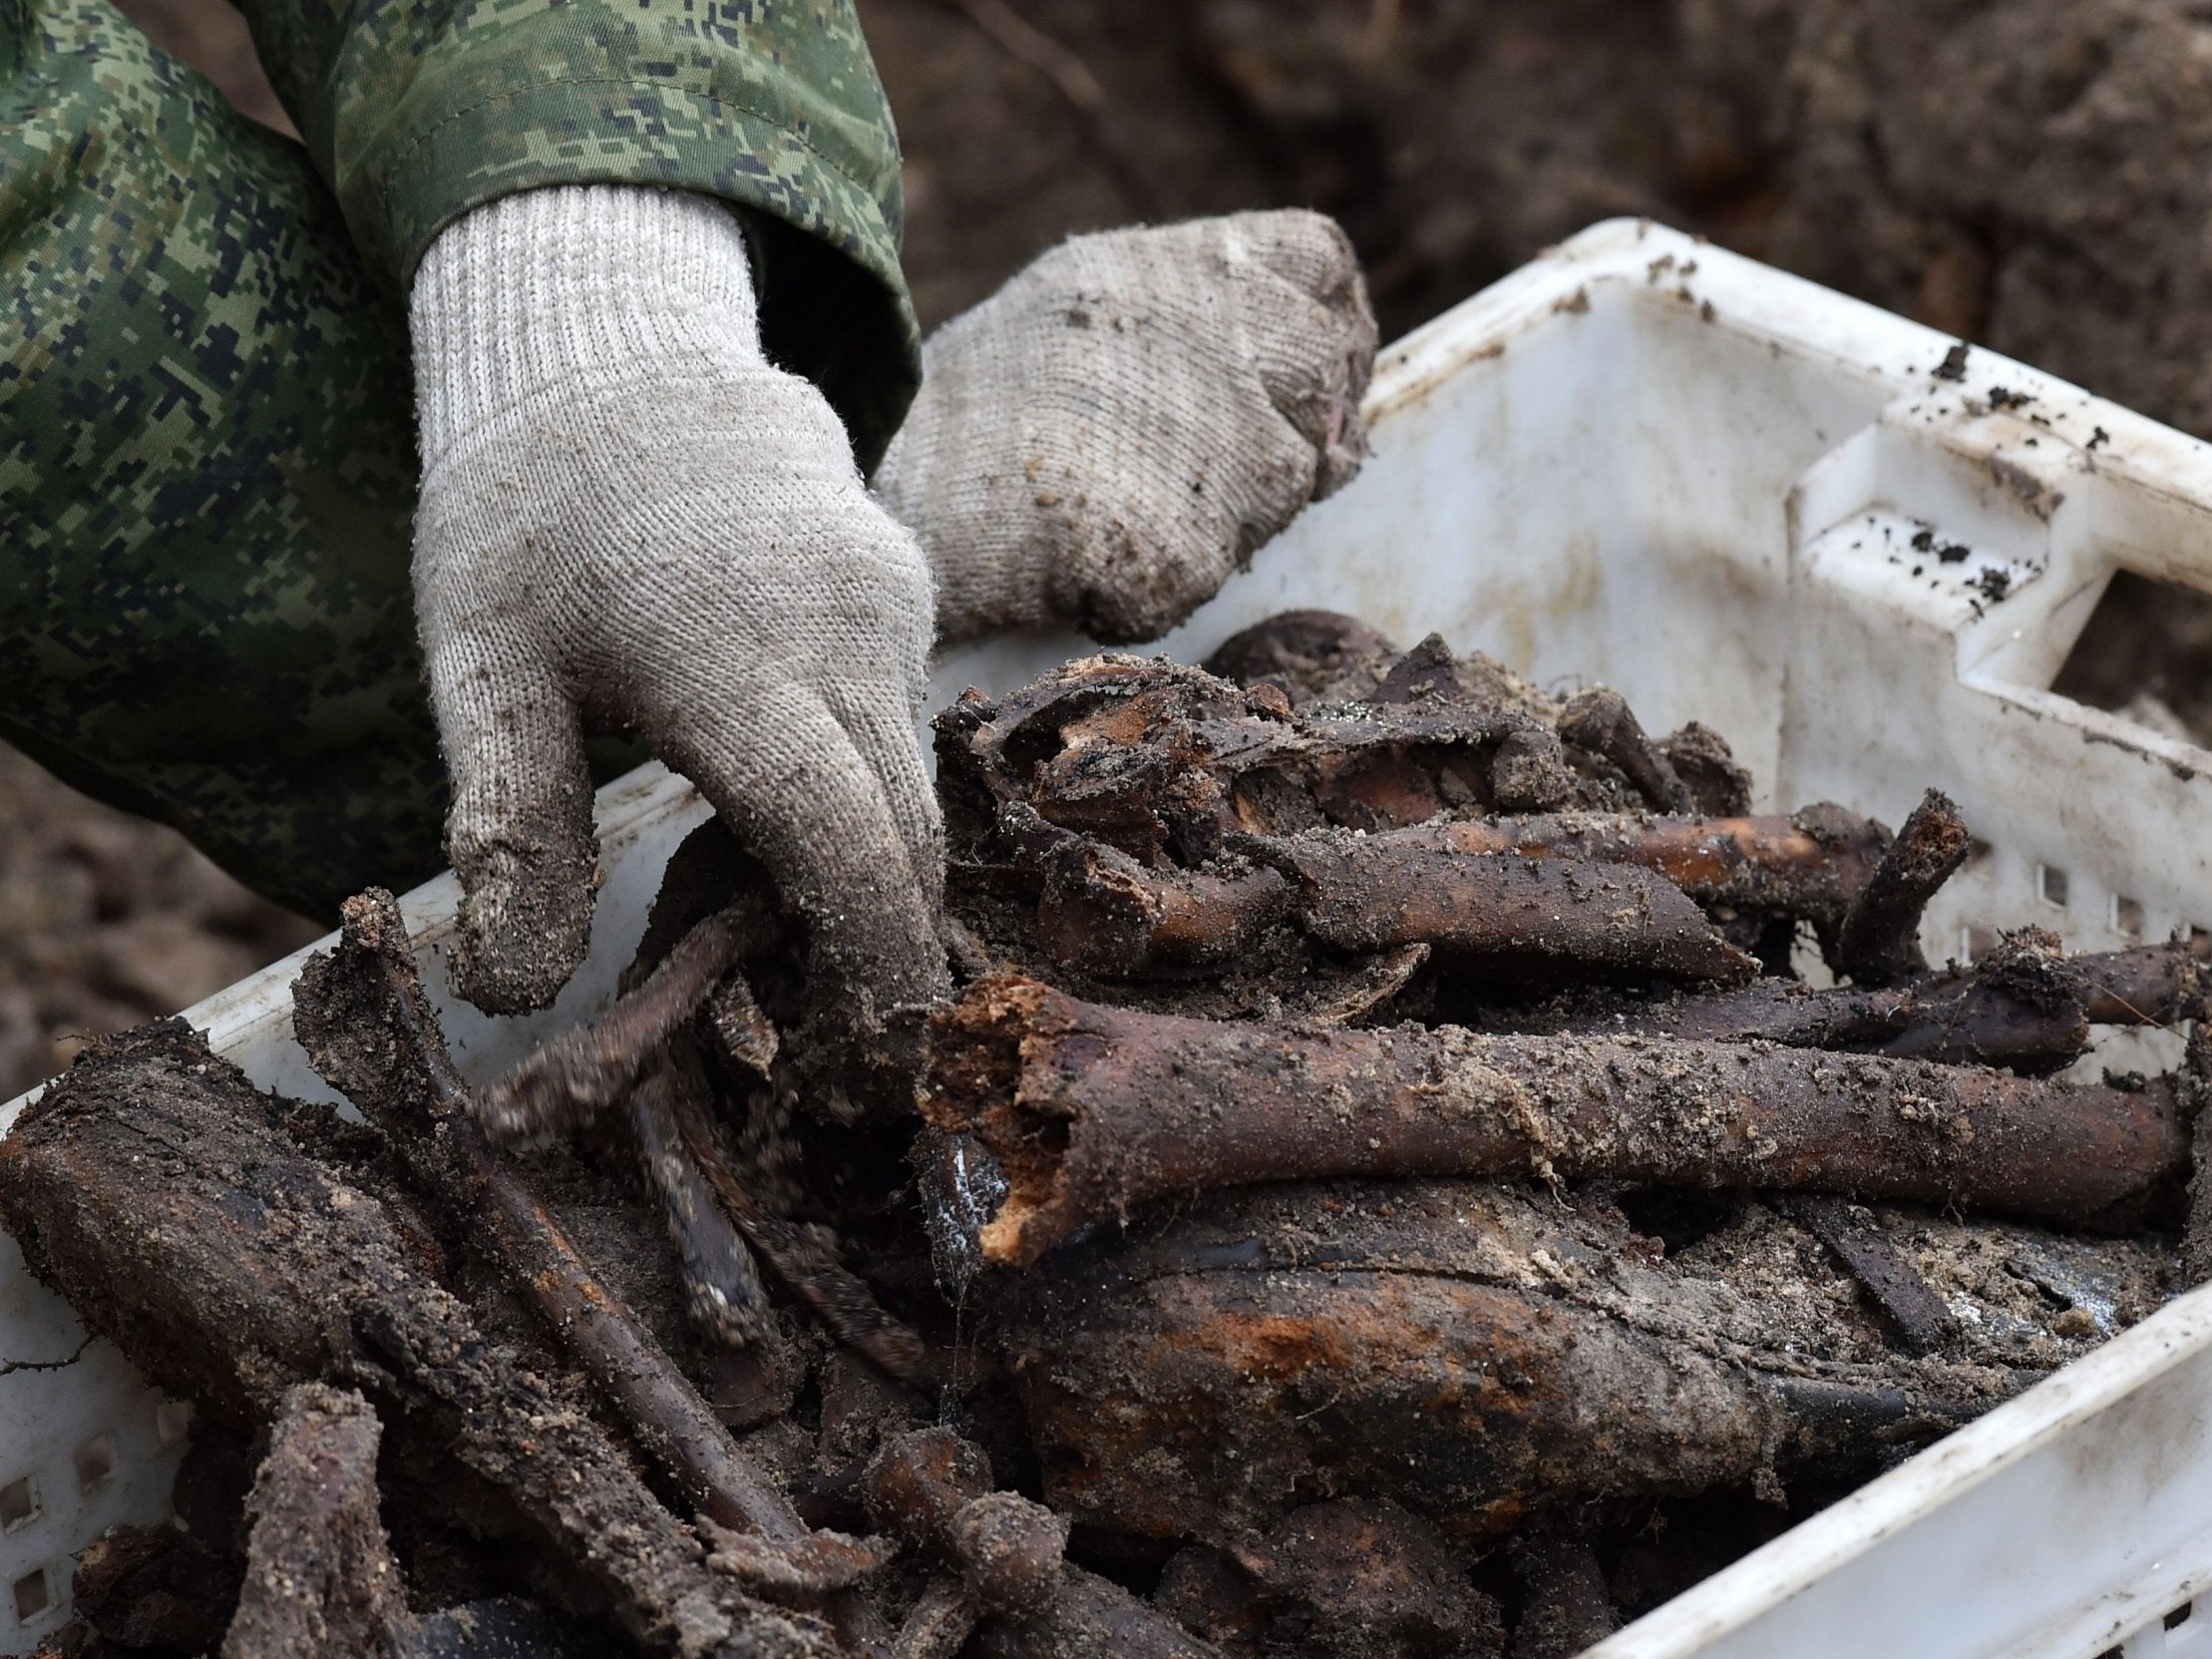 Belarus' servicemen excavate a mass grave at a construction site in the city of Brest